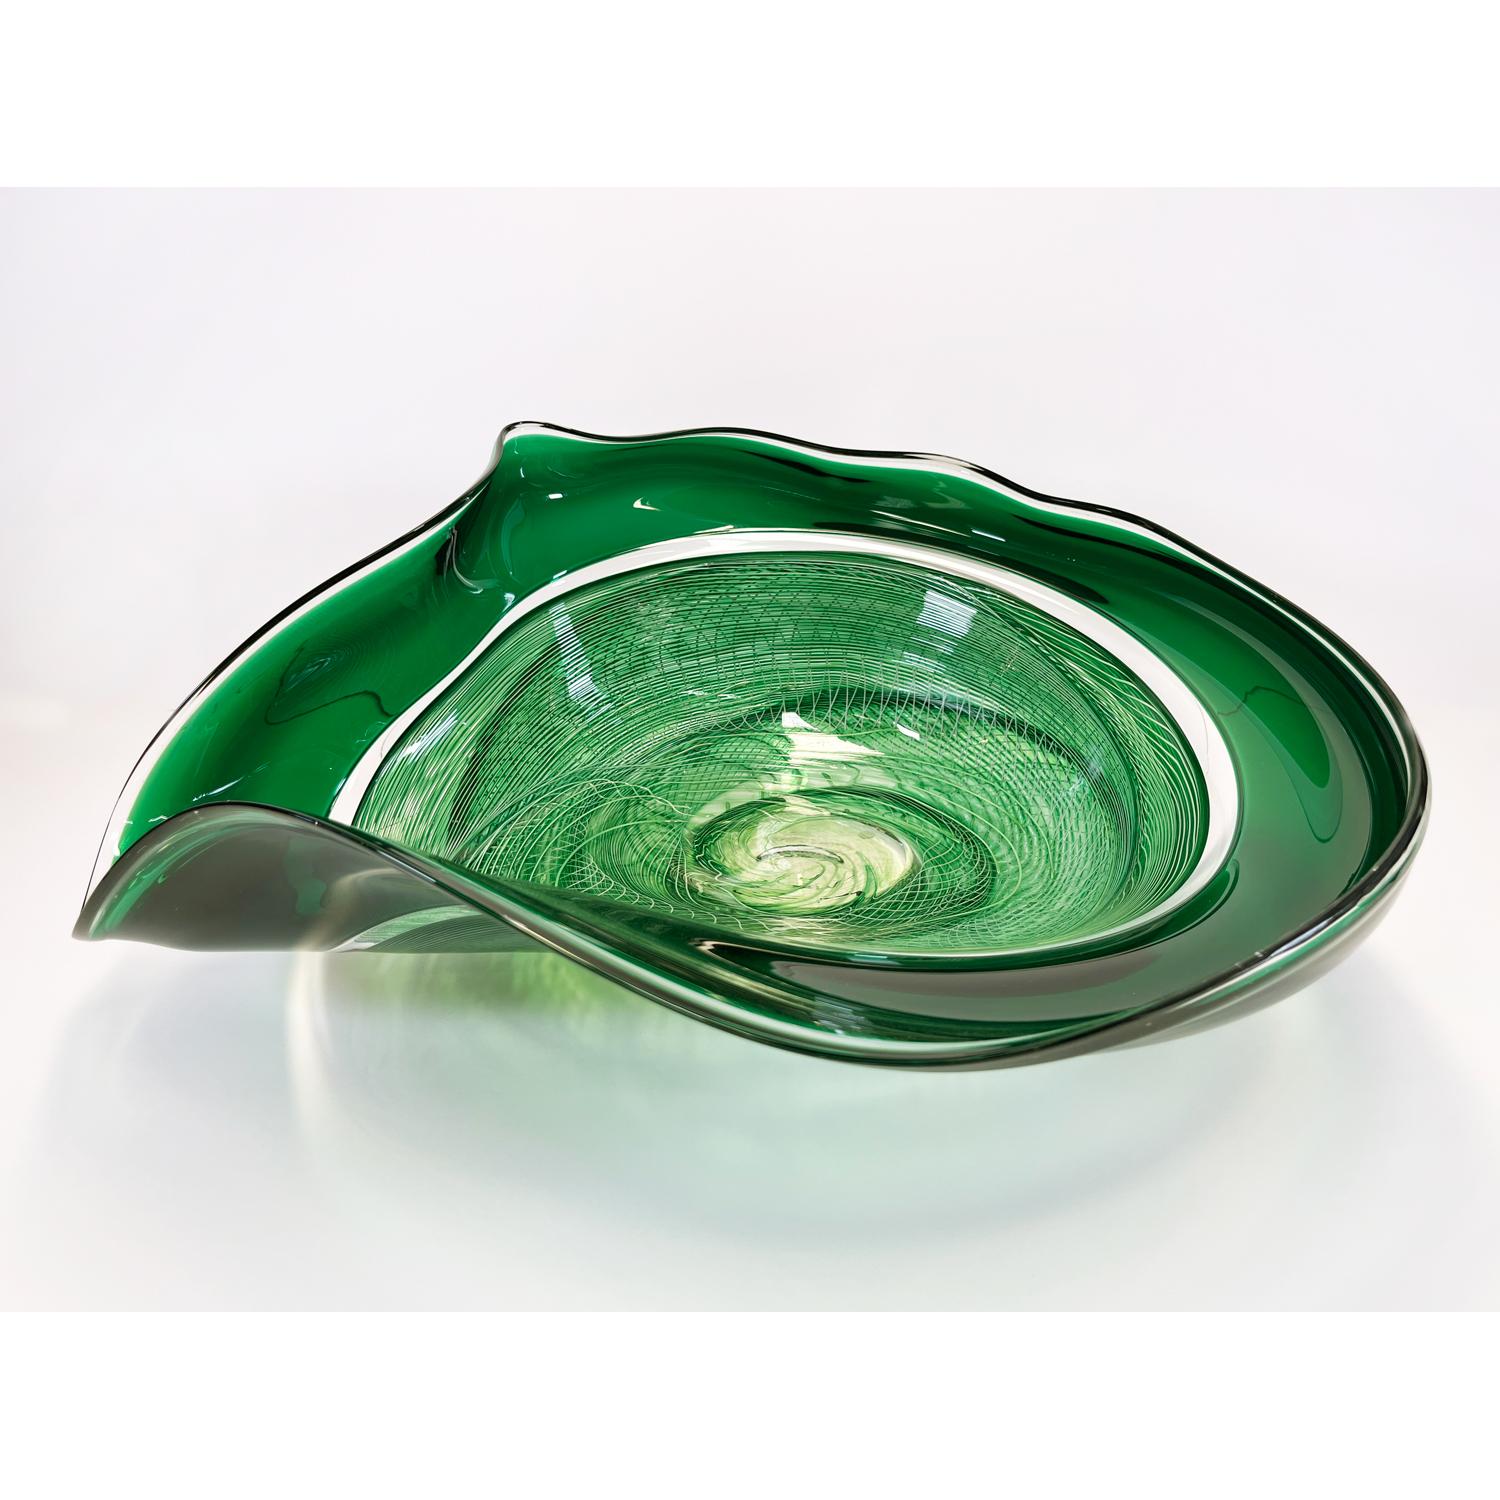 This Emerald Rondelle Bowl is a continuation of David's work with cane. Fusing his signature wave bowl motif with his newer rondelle cane pattern. This beautiful glass bowl is sure to be a showstopper in your space. 

David Thai is a Chinese